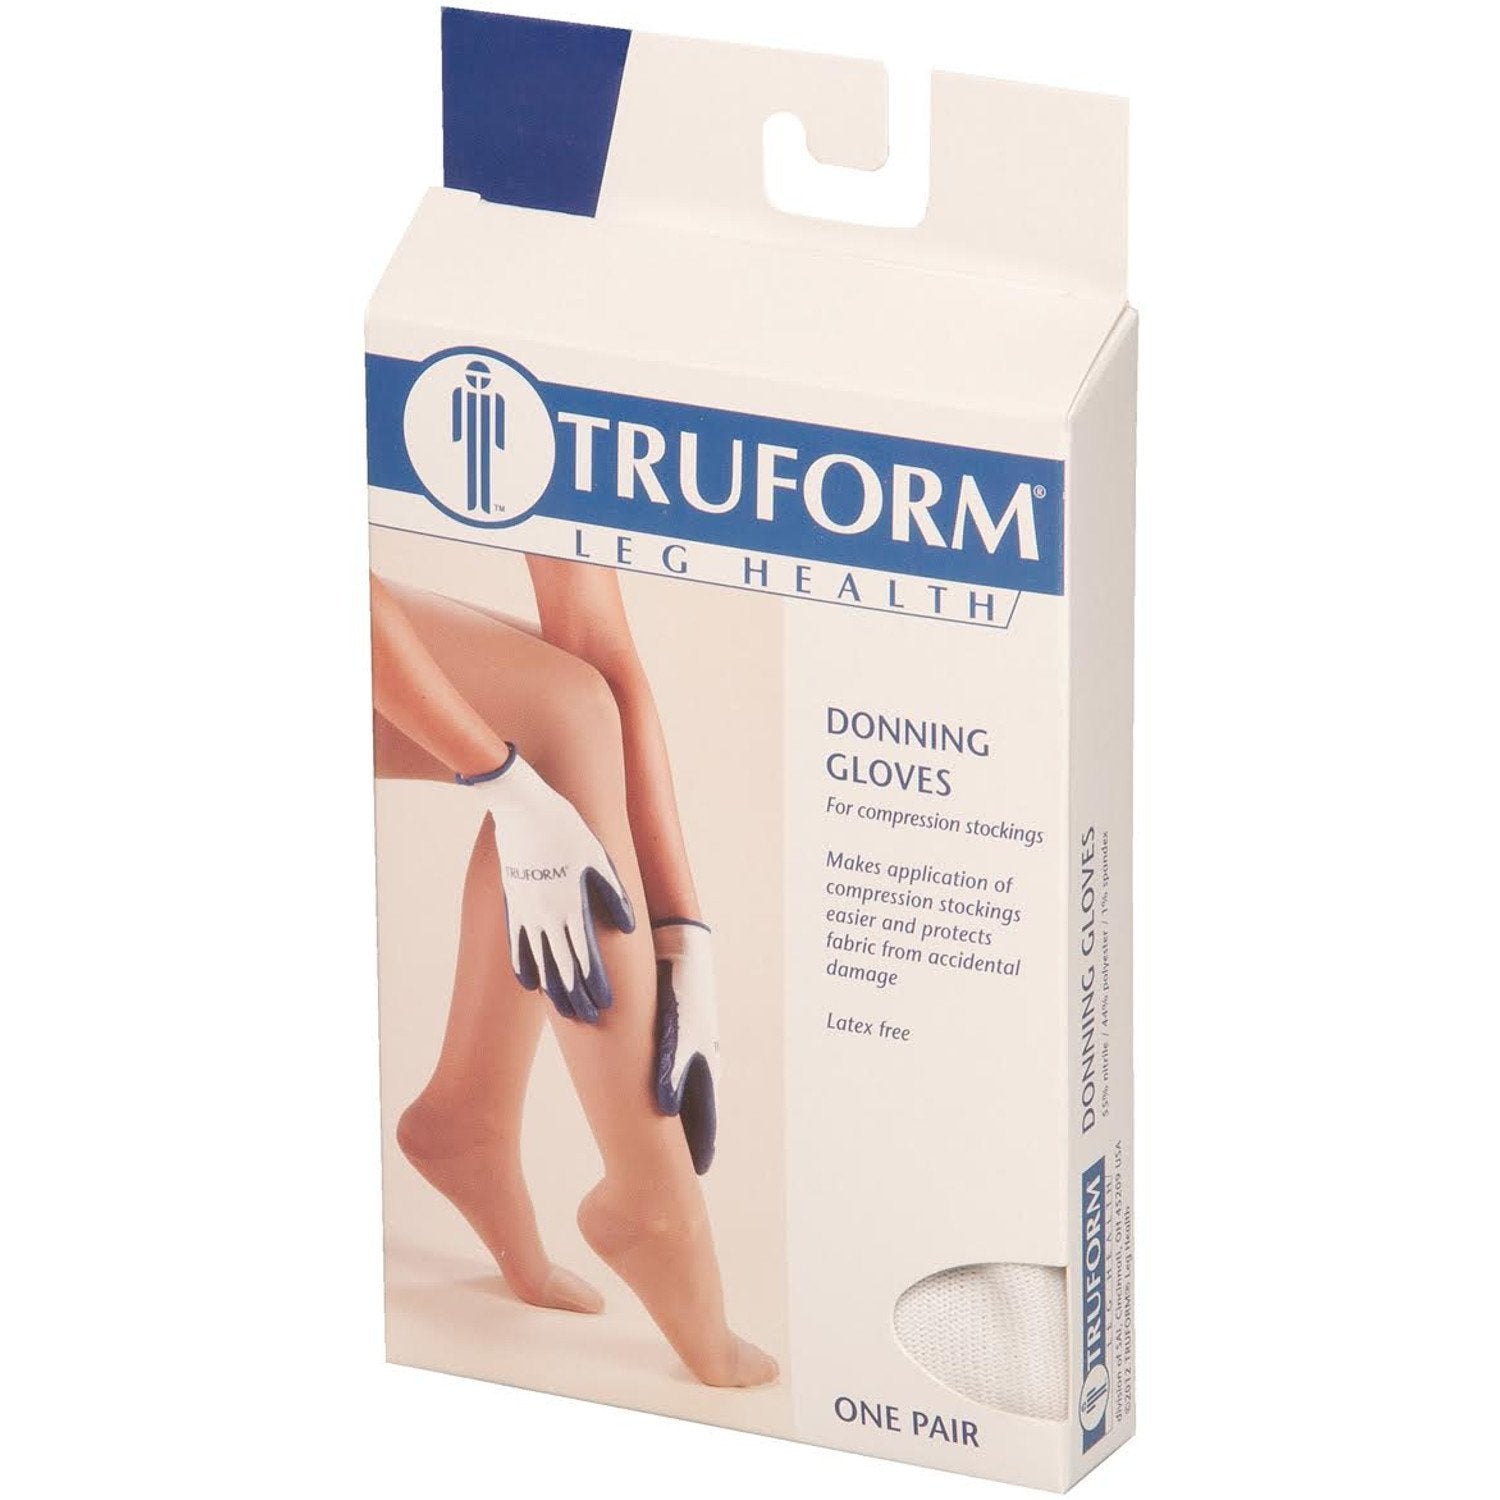 Truform Donning Gloves, In Package